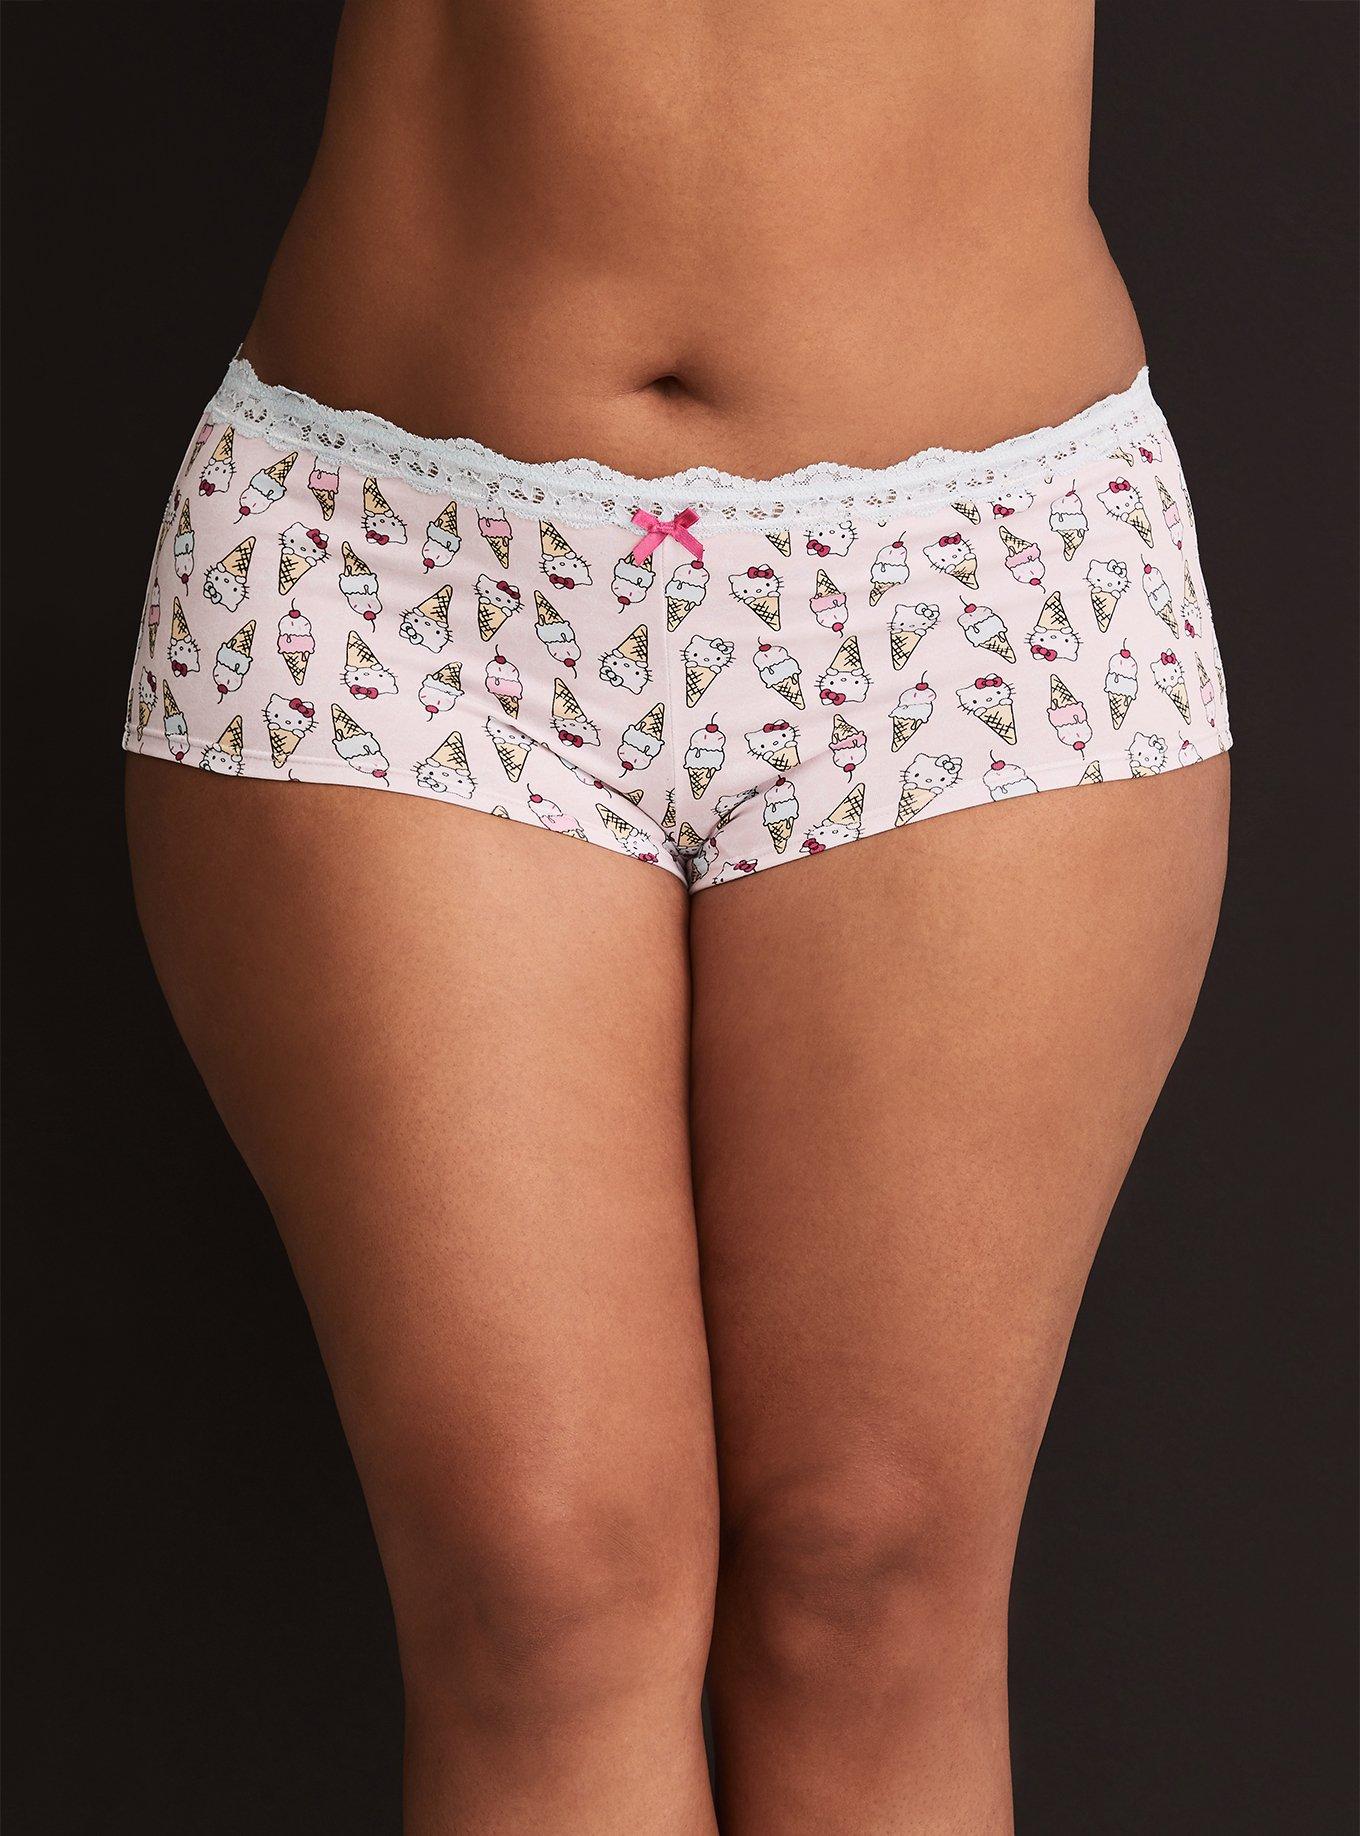 Hello Kitty Panties, these are a ladies boy shorts style,…